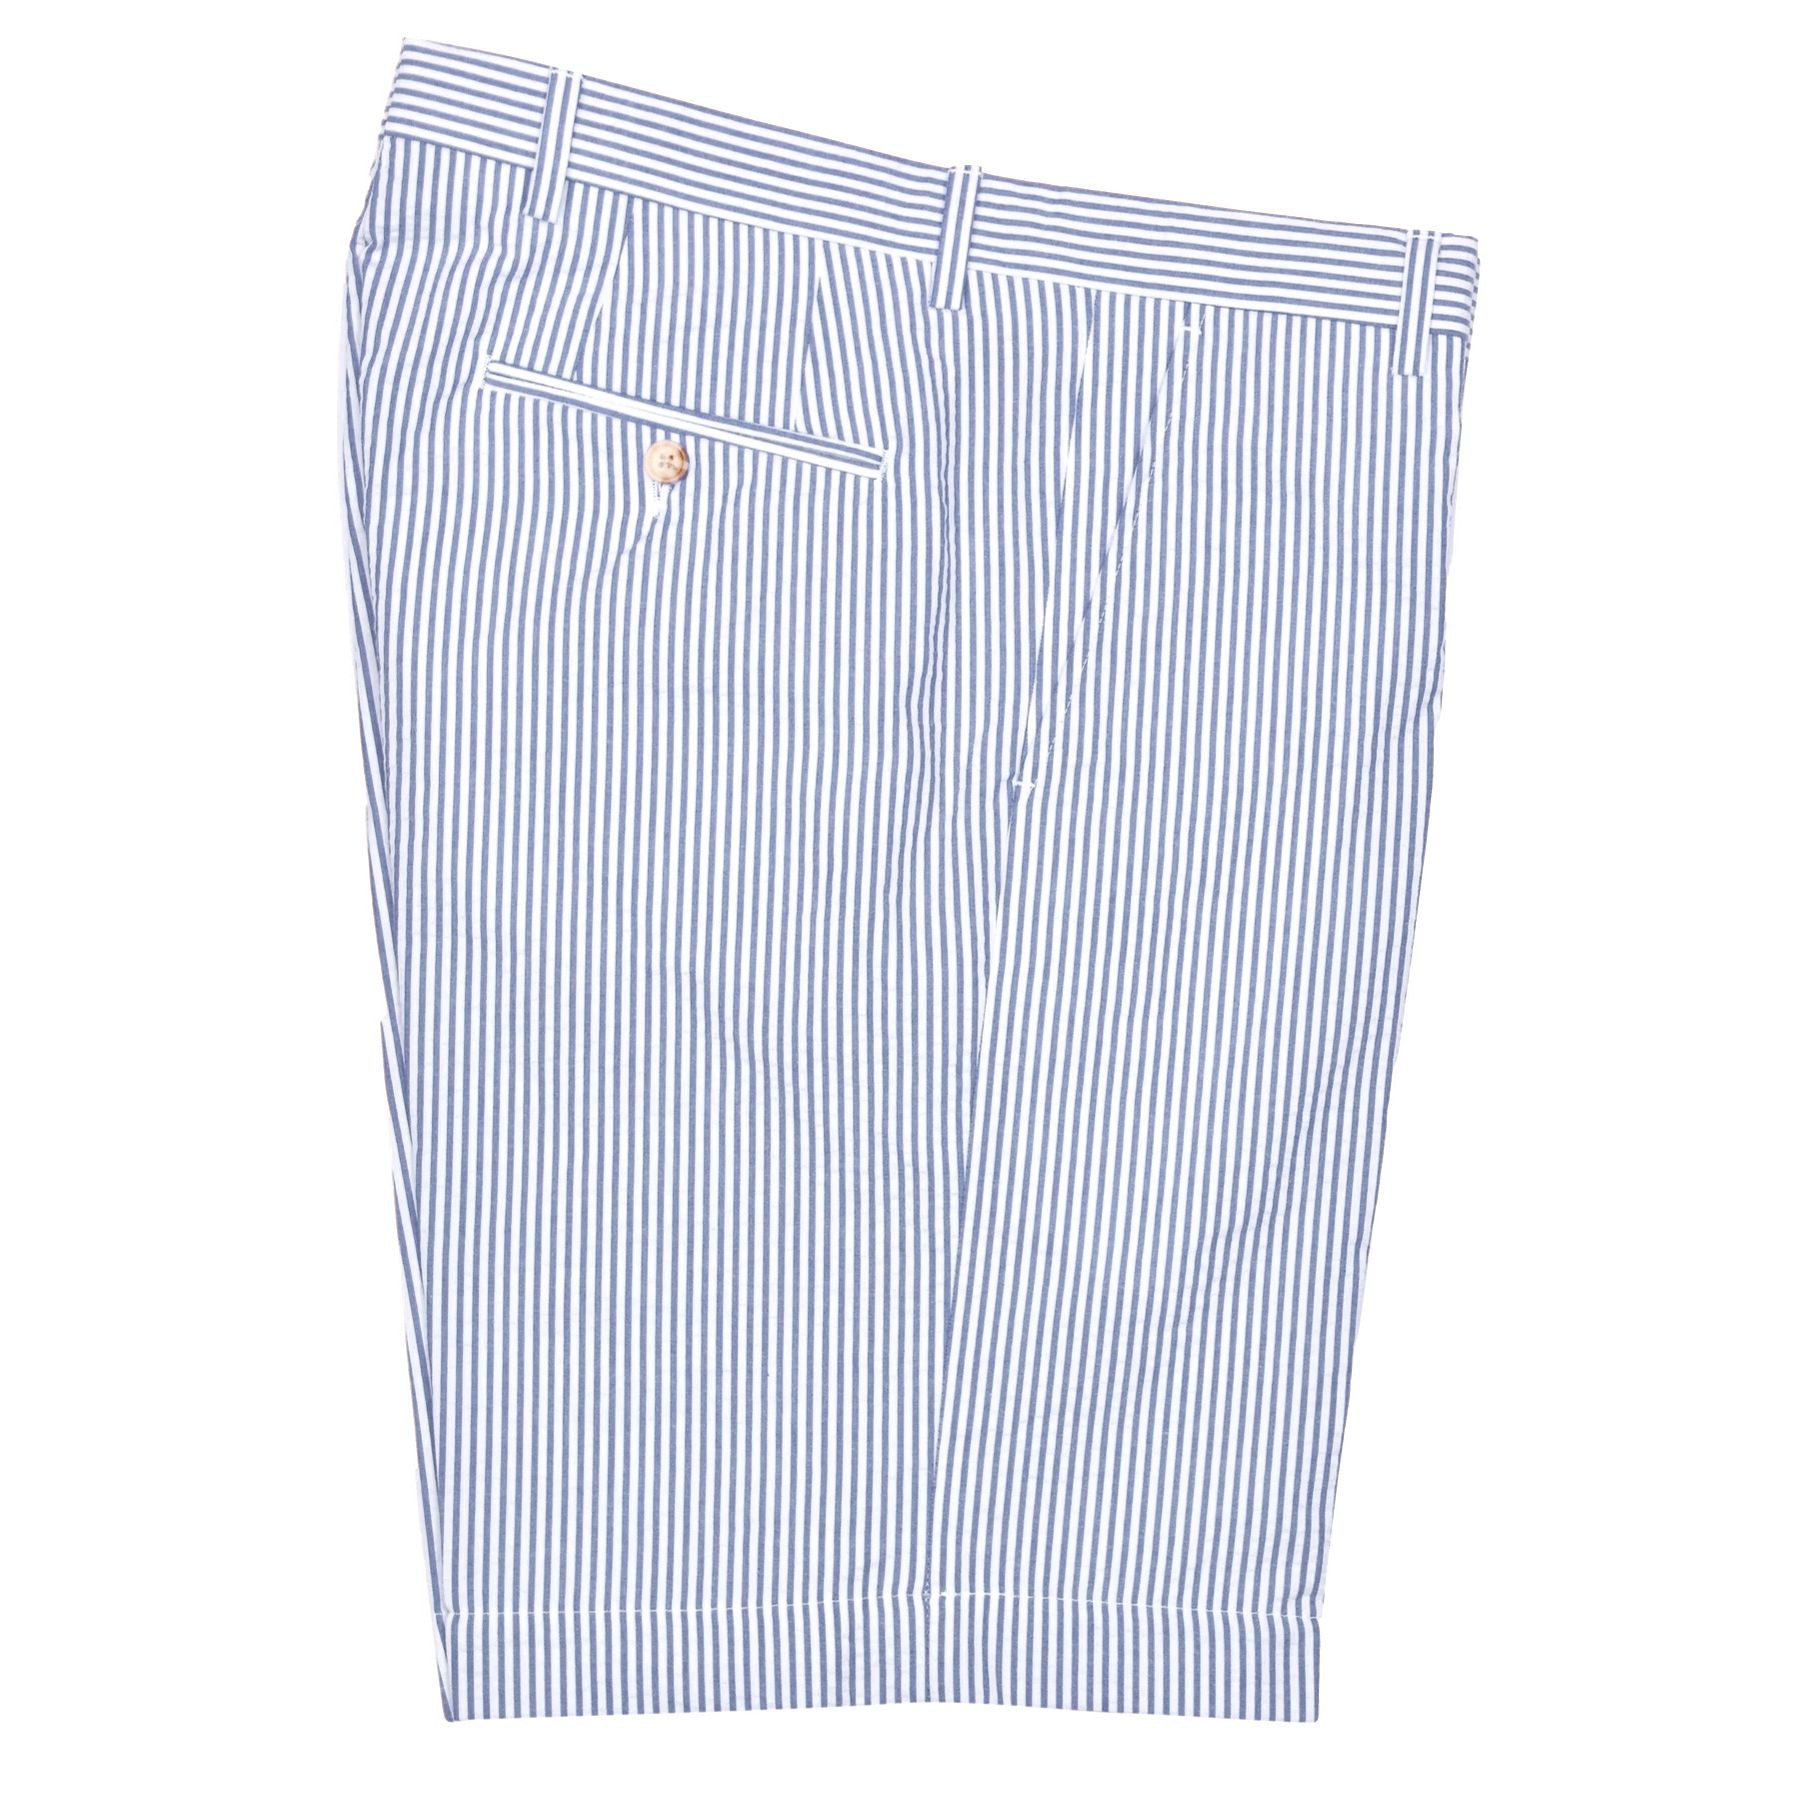 Seersucker Cotton Short in Navy and White (Hampton9 Plain Front) by Berle